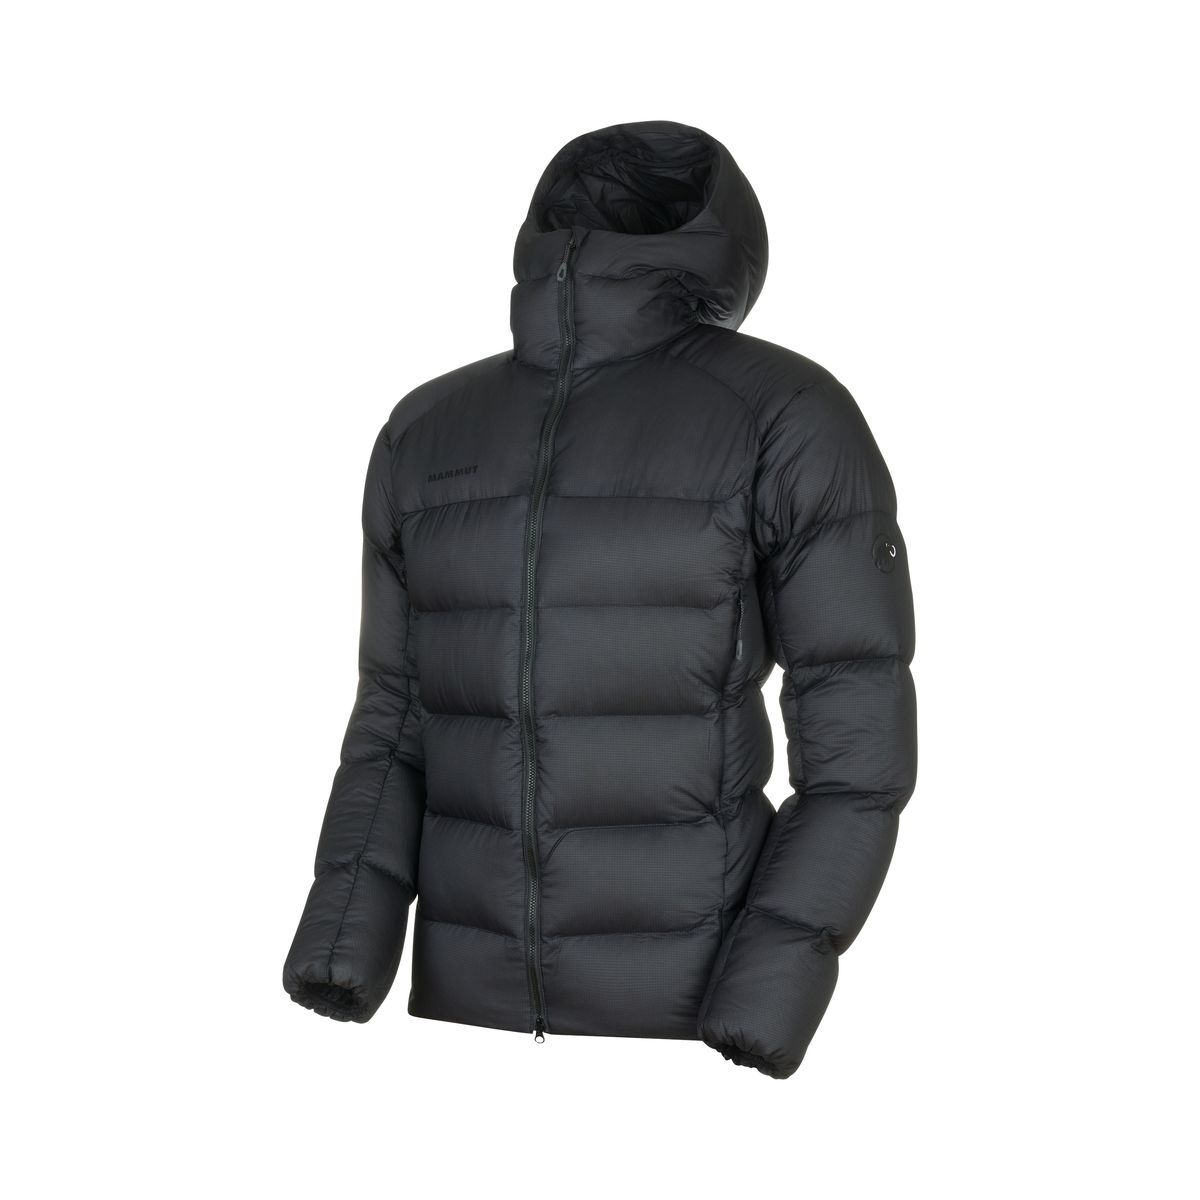 Mammut Meron IN Hooded Jacket - Chaqueta impermeable - Hombre